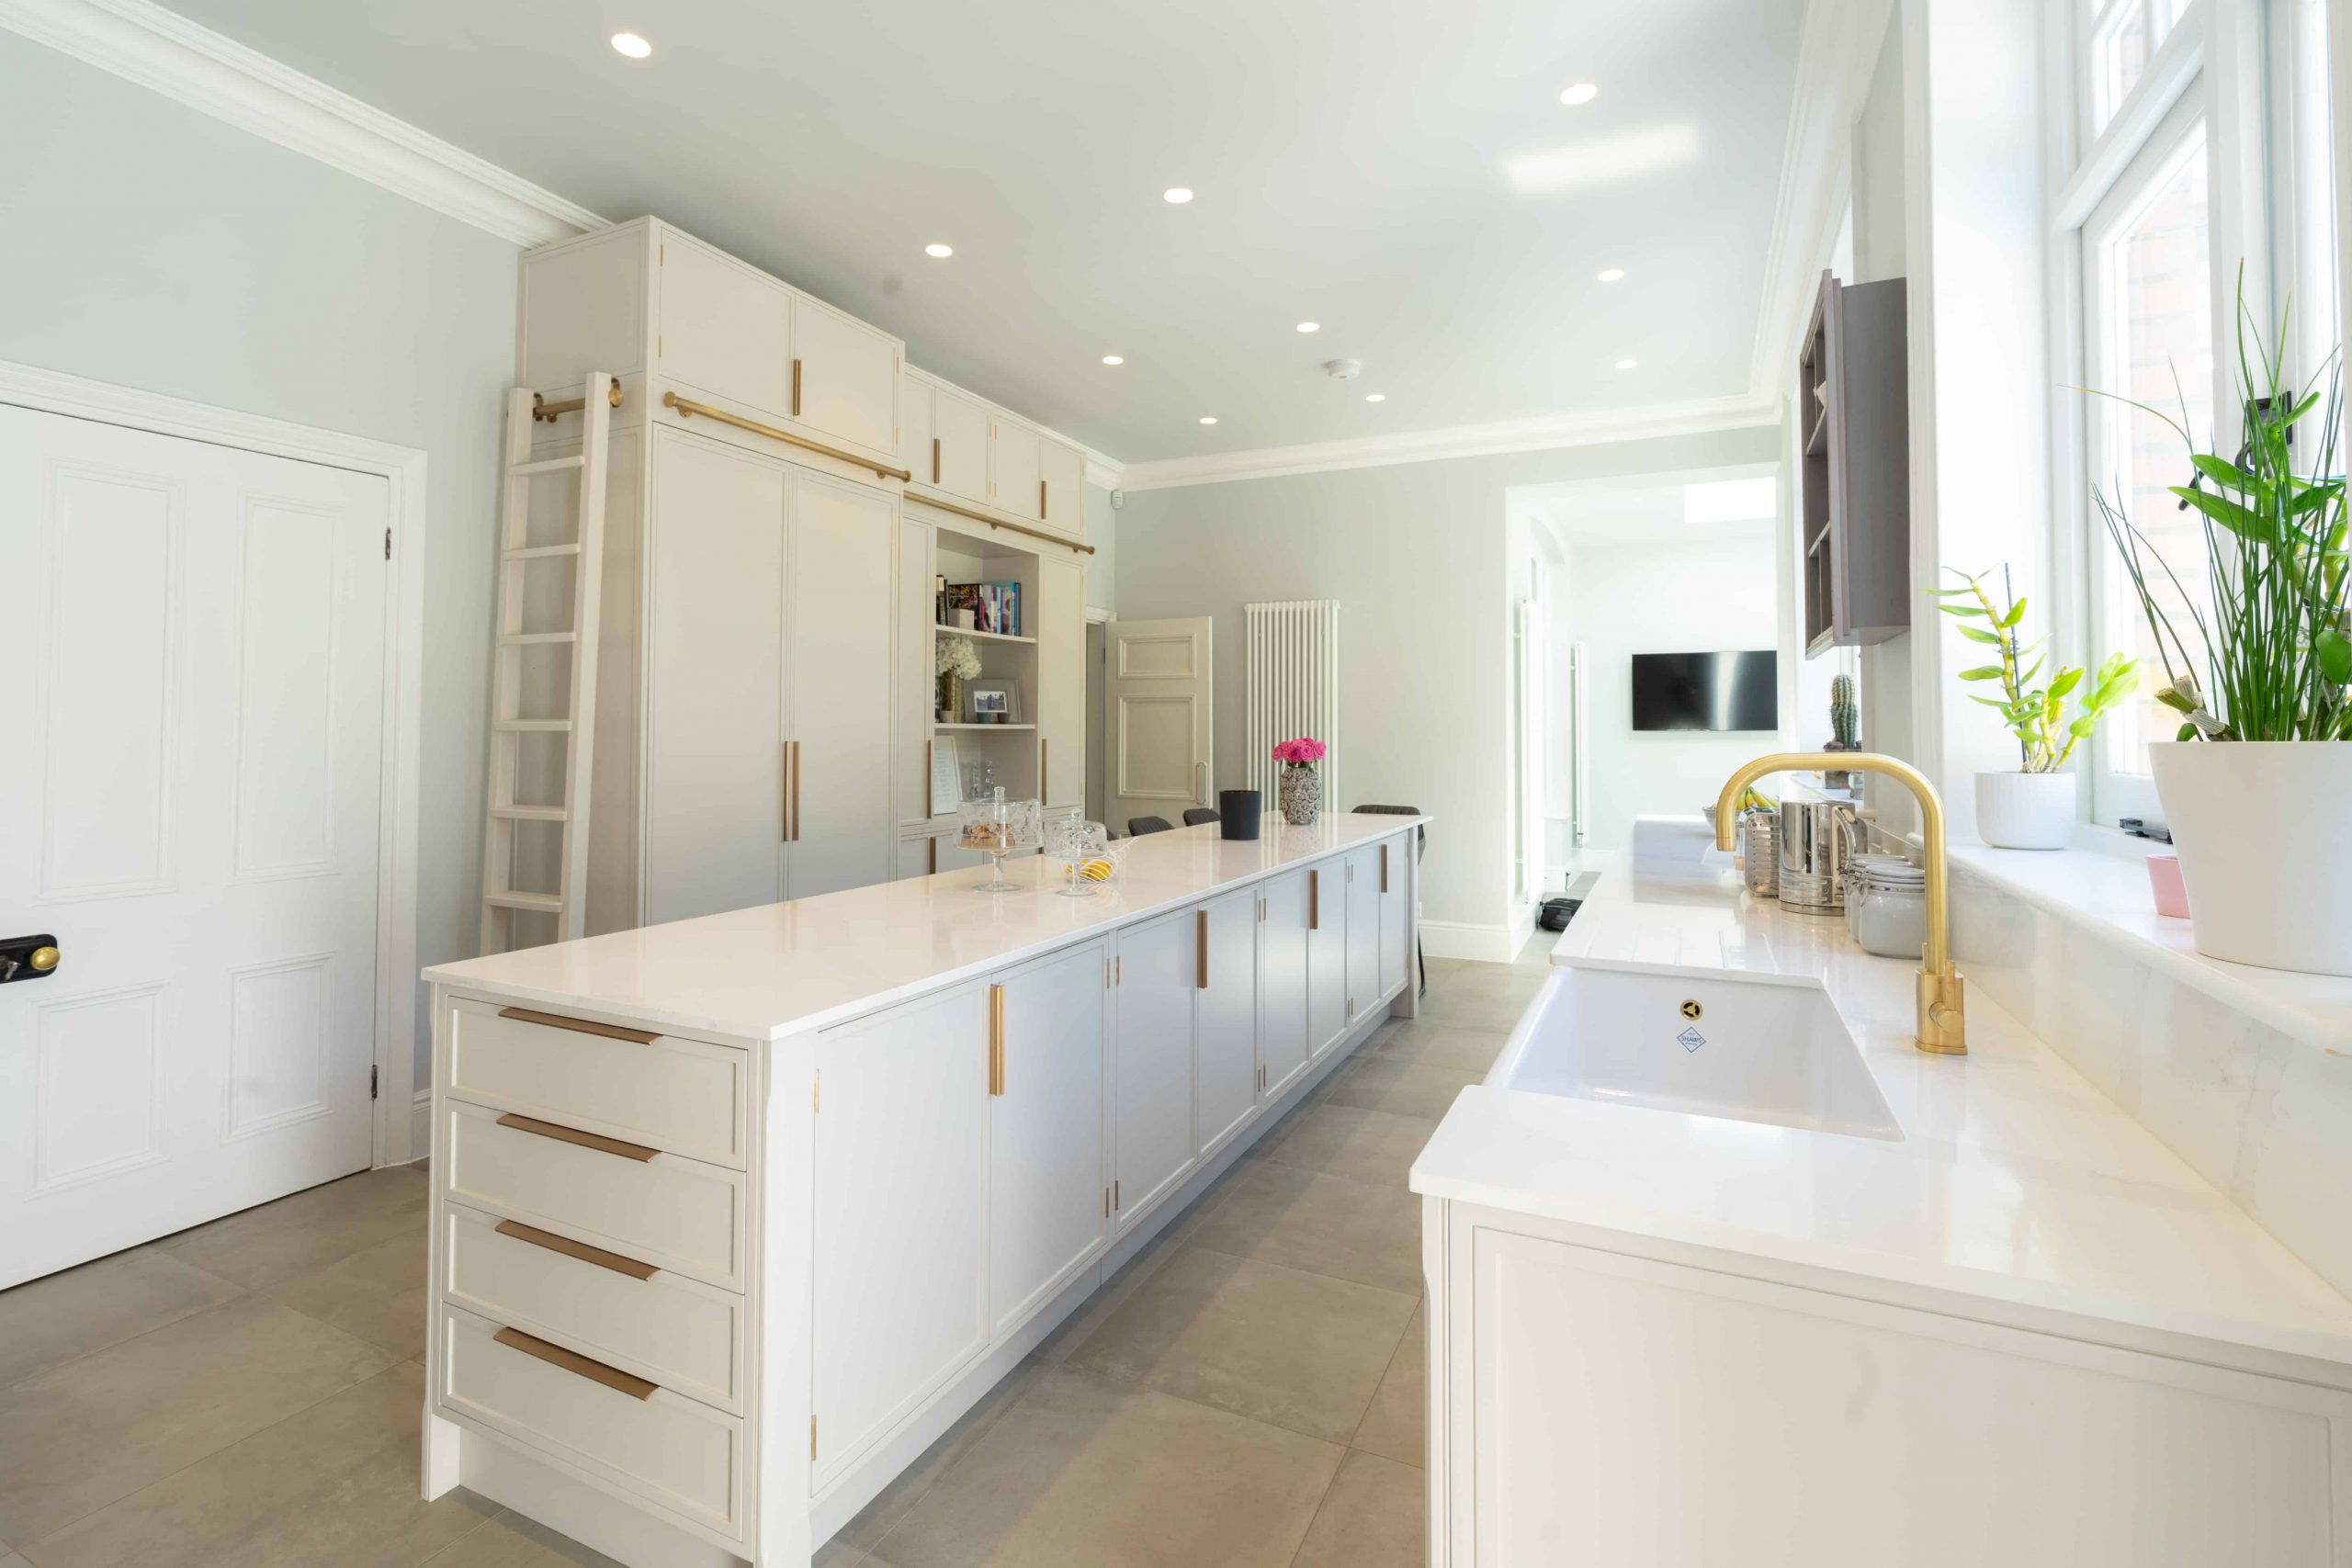 Top Planning Tips for Kitchen Islands​ in 2022